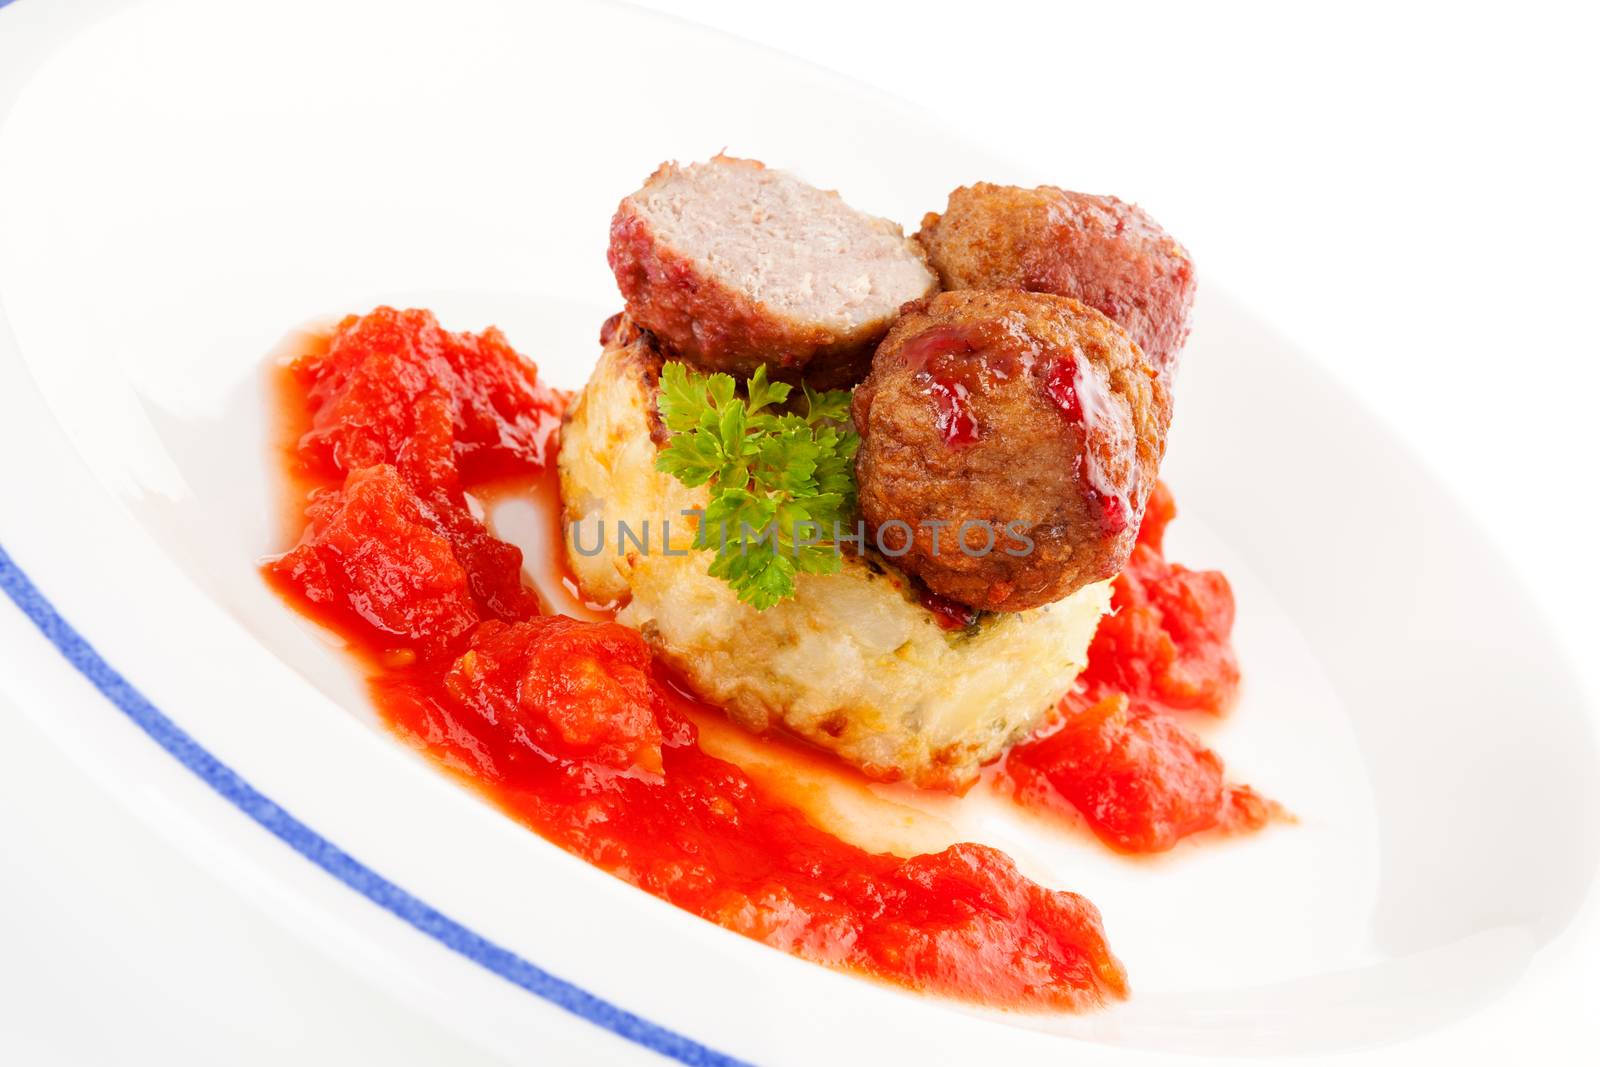 Meatballs, tomato sauce and mashed potatoes. by eskymaks